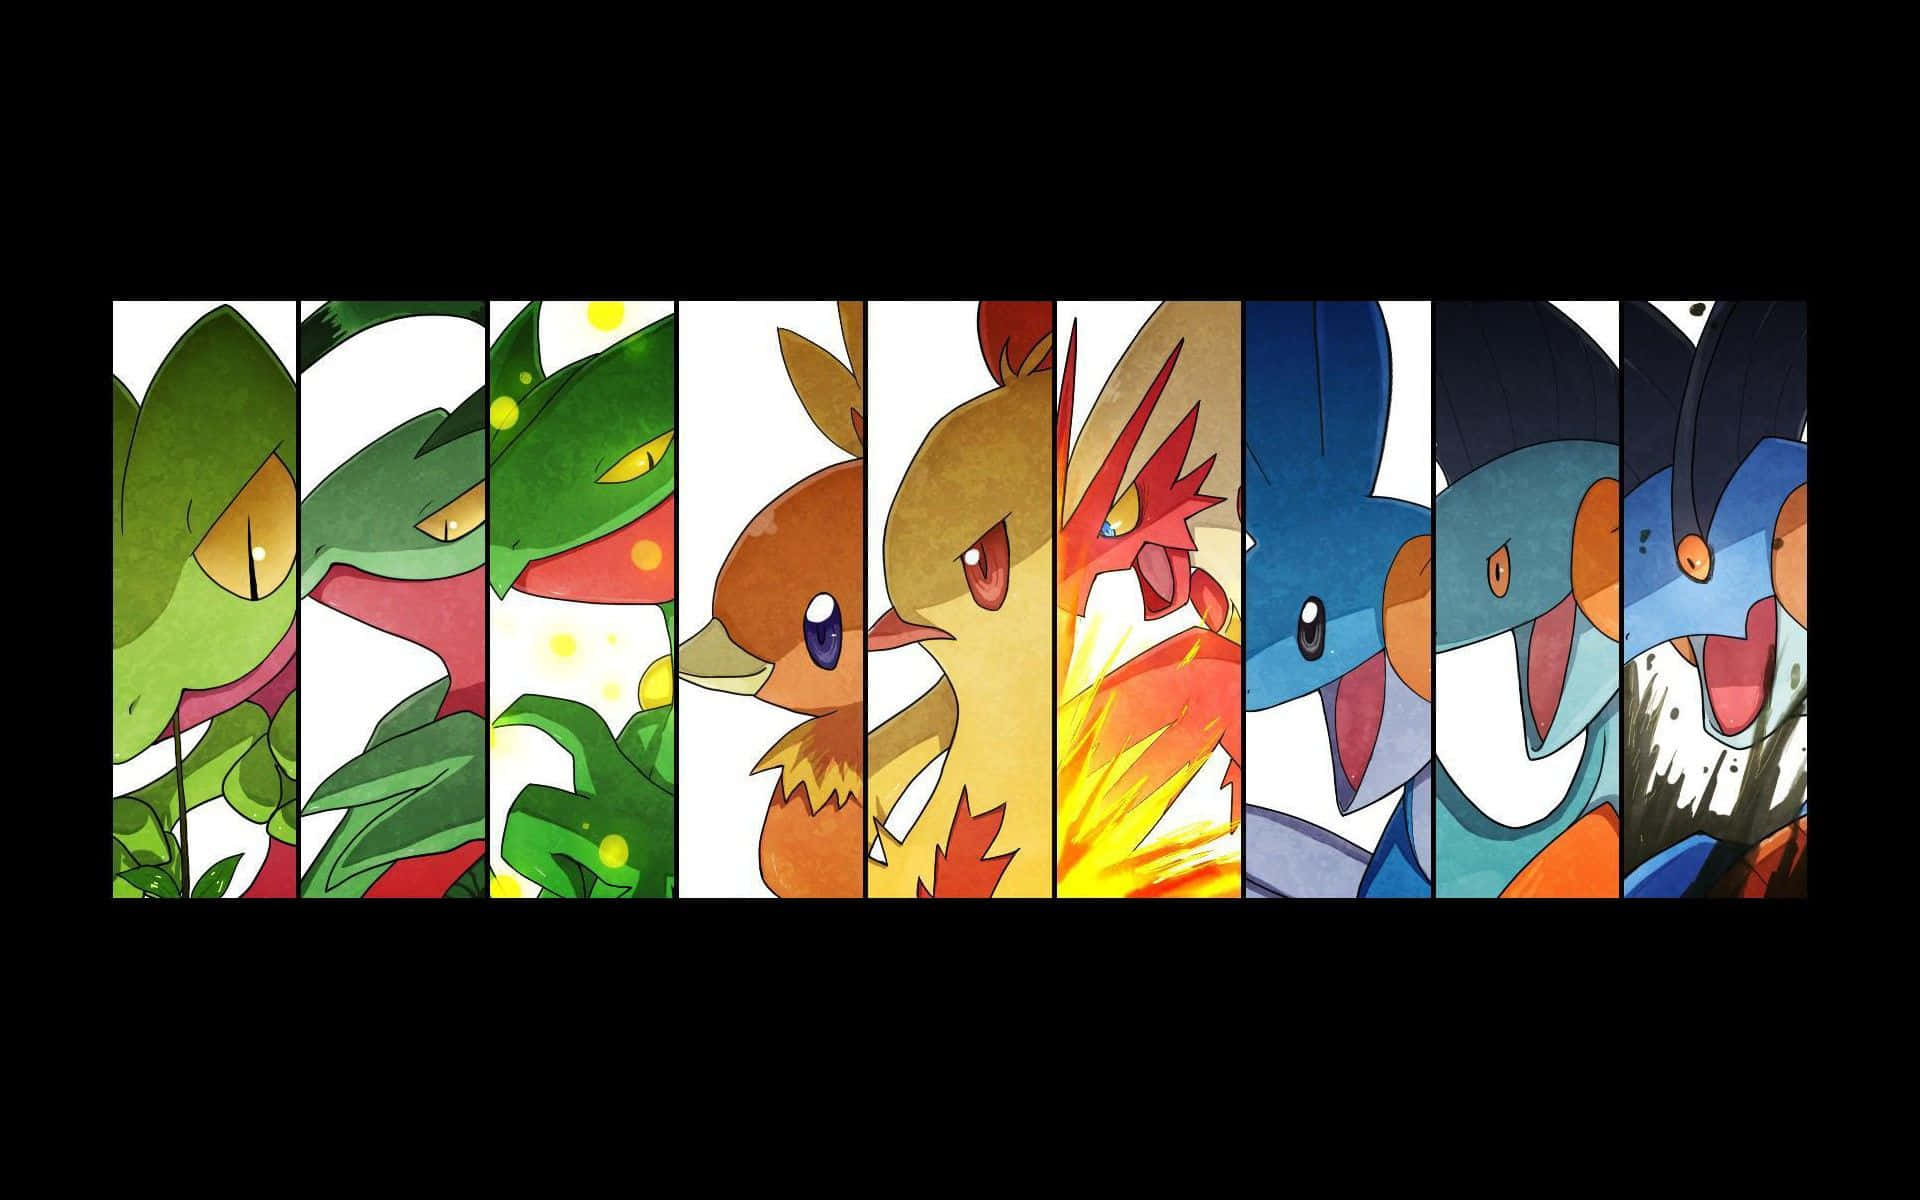 "The different forms of Pokémon we witness through their amazing evolution" Wallpaper